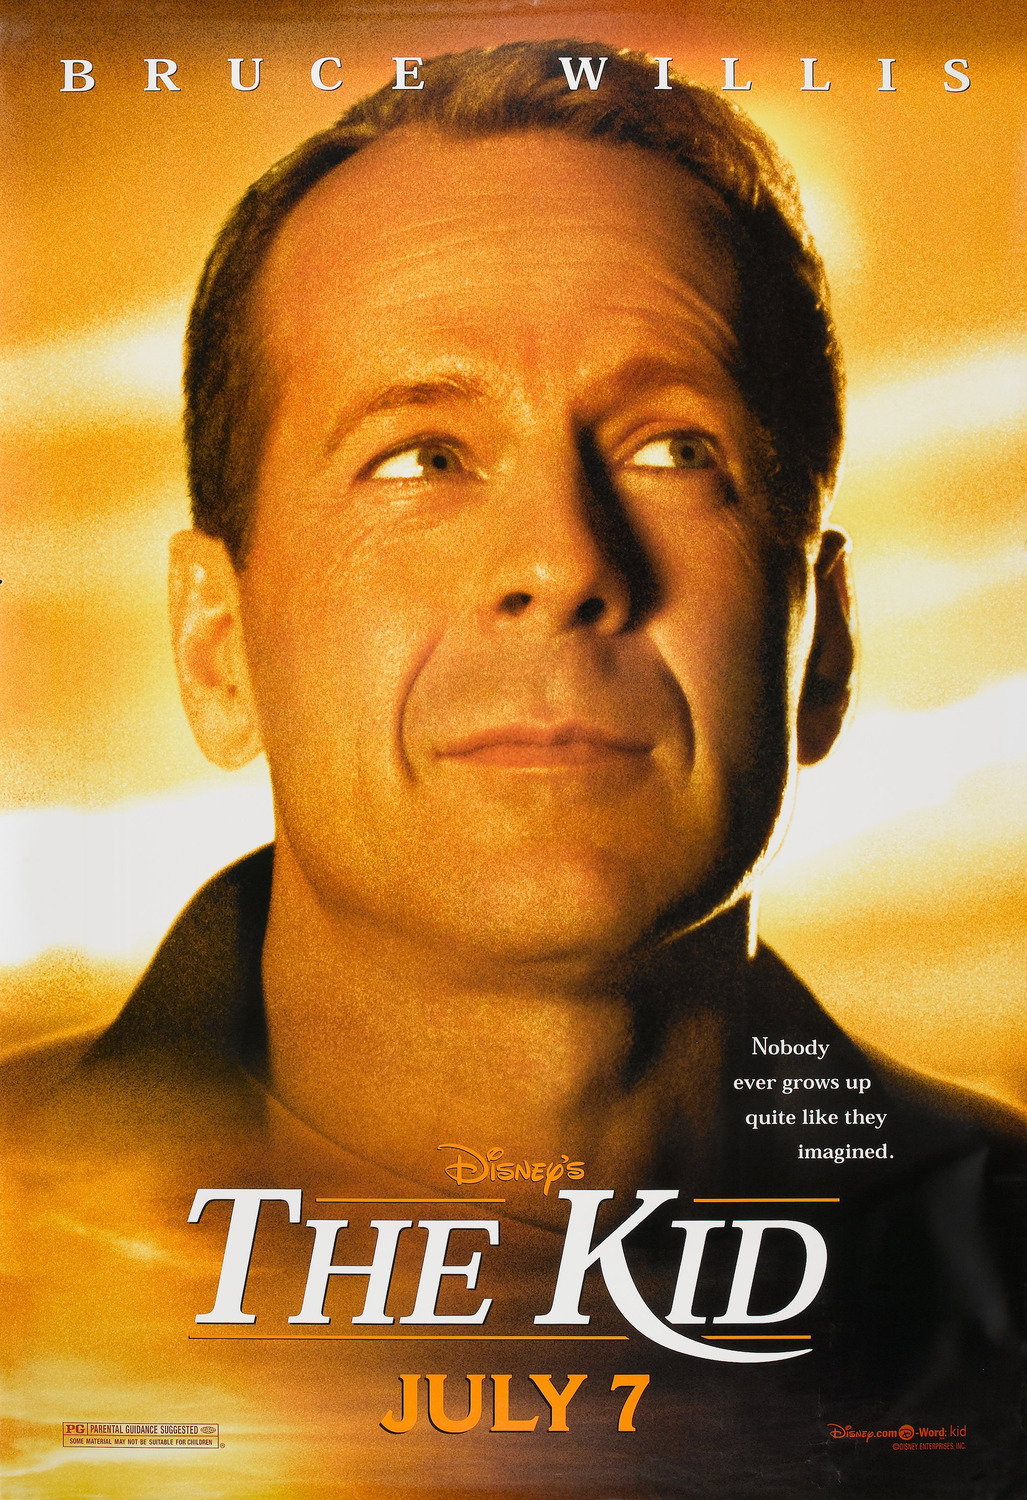 Extra Large Movie Poster Image for Disney's The Kid 